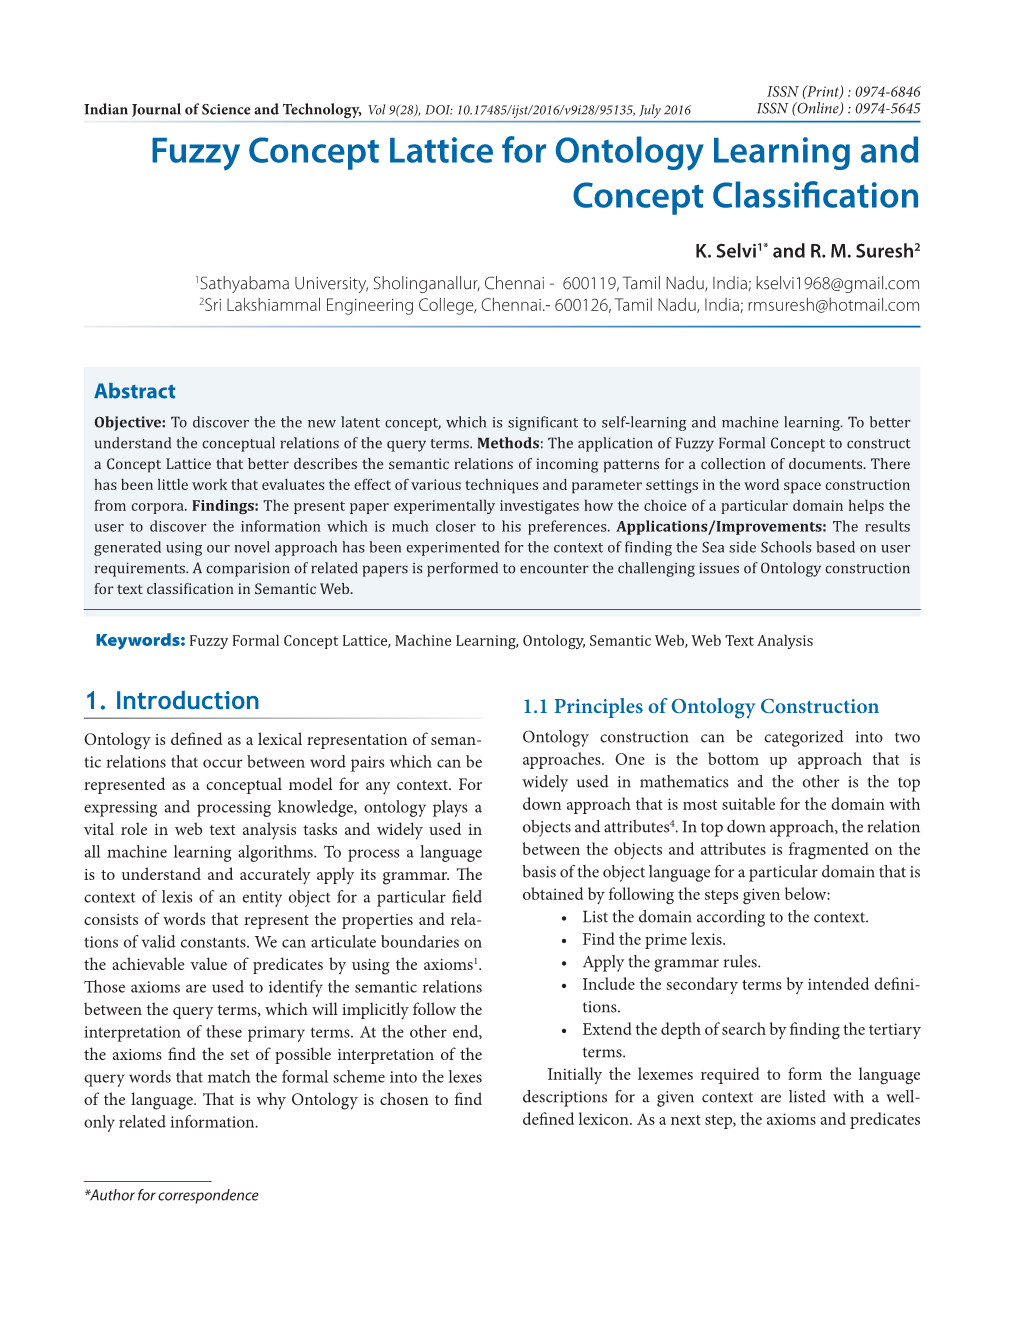 Fuzzy Concept Lattice for Ontology Learning and Concept Classification